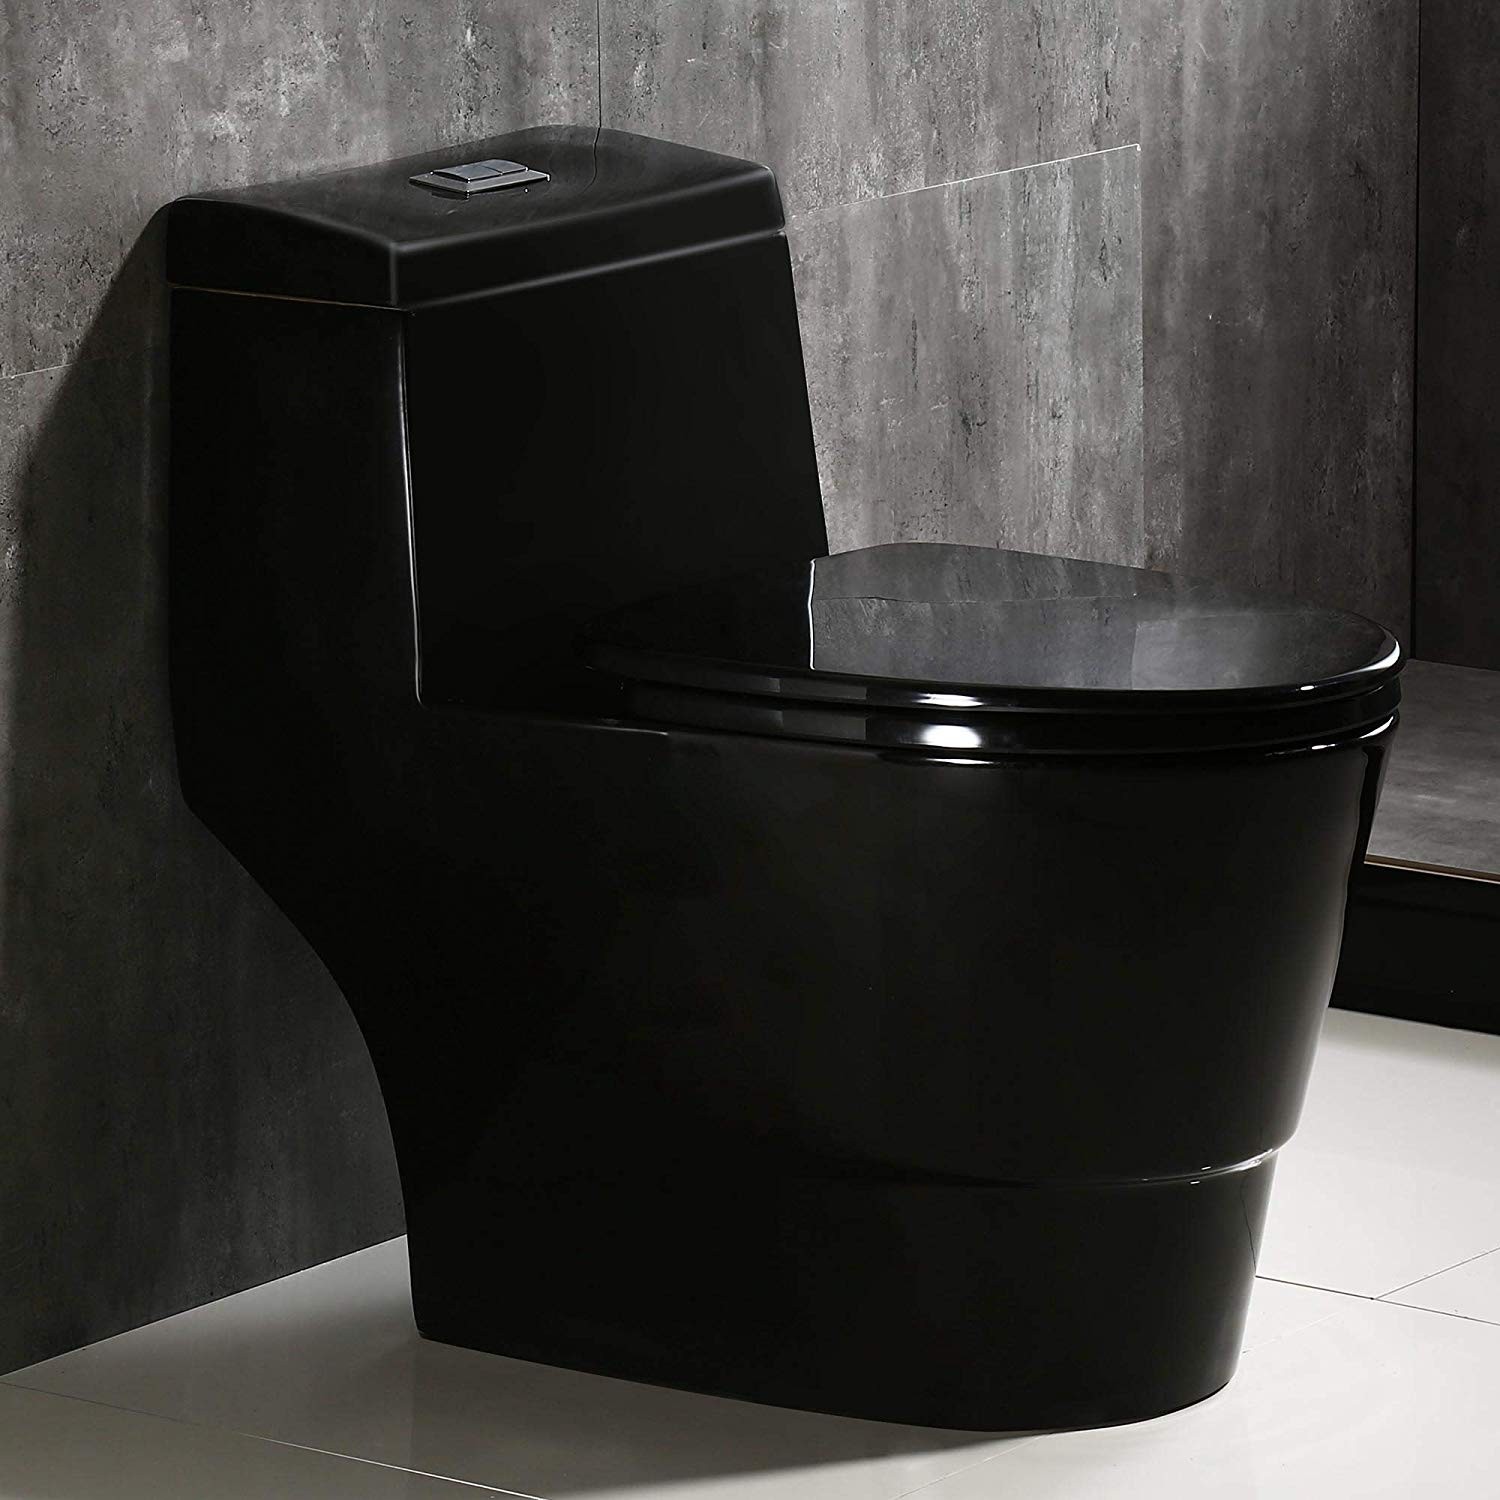  WOODBRIDGEE One Piece Toilet with Soft Closing Seat, Chair Height, 1.28 GPF Dual, Water Sensed, 1000 Gram MaP Flushing Score Toilet, B0941, Black_9905